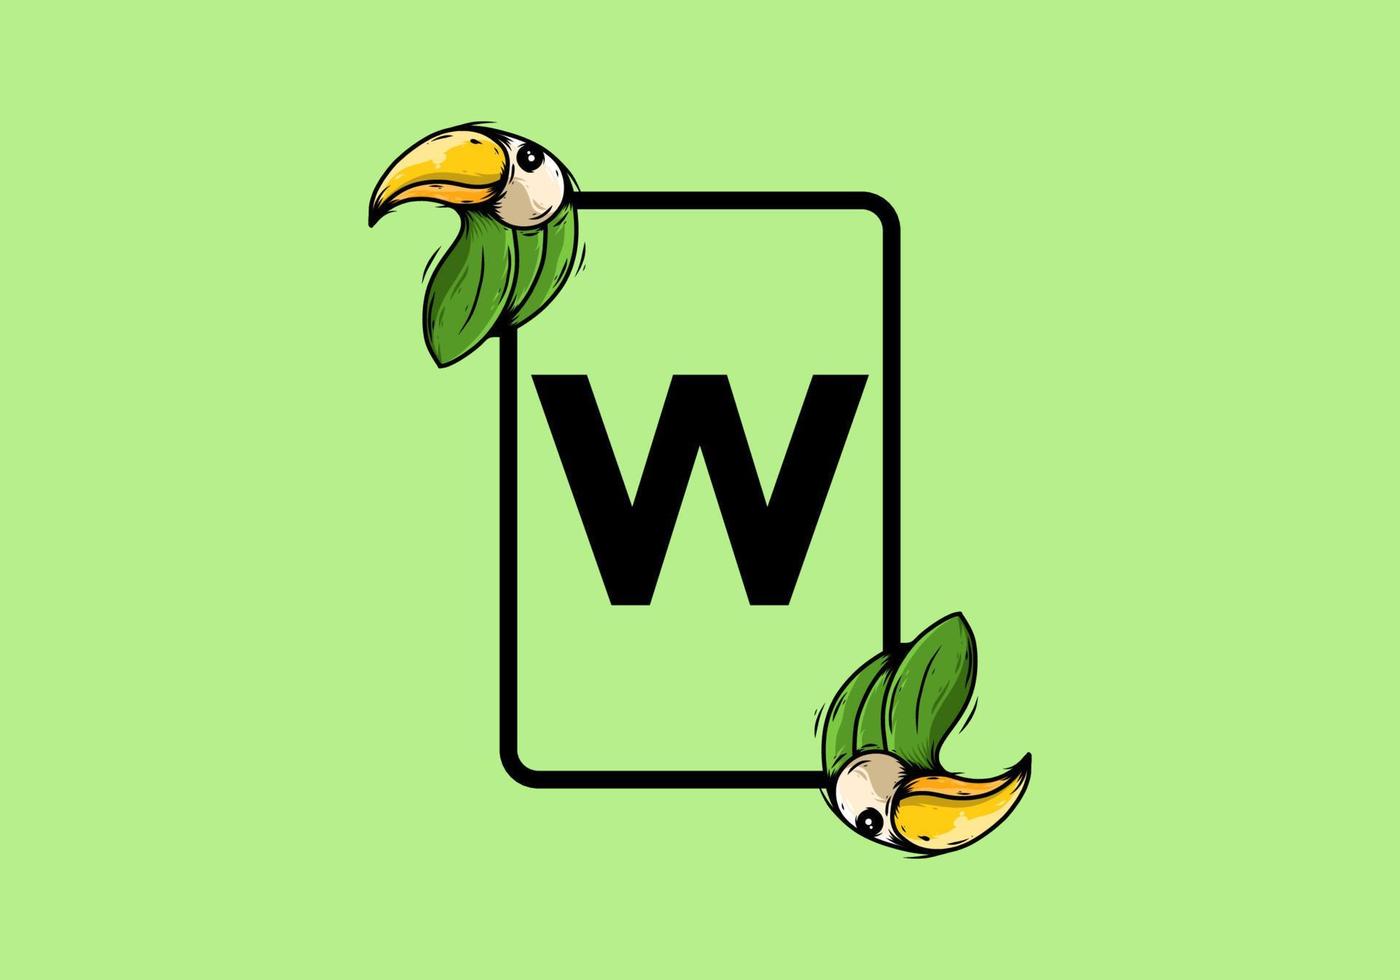 Green bird with W initial letter vector